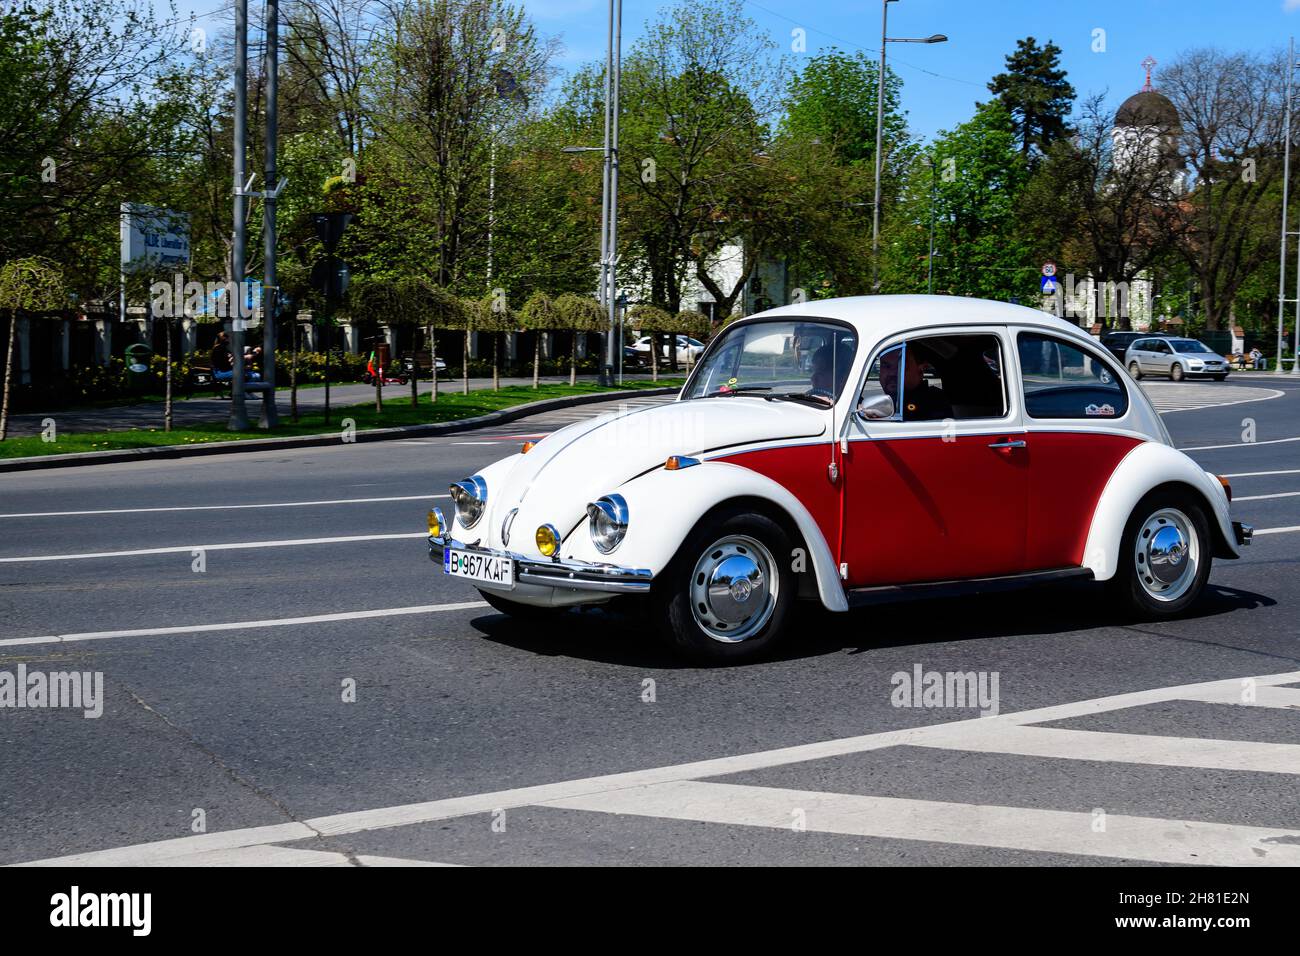 Bucharest, Romania, 24 April 2021 Old retro white and vivid red Volkswagen Beetle classic car in traffic in a street in a sunny spring day Stock Photo